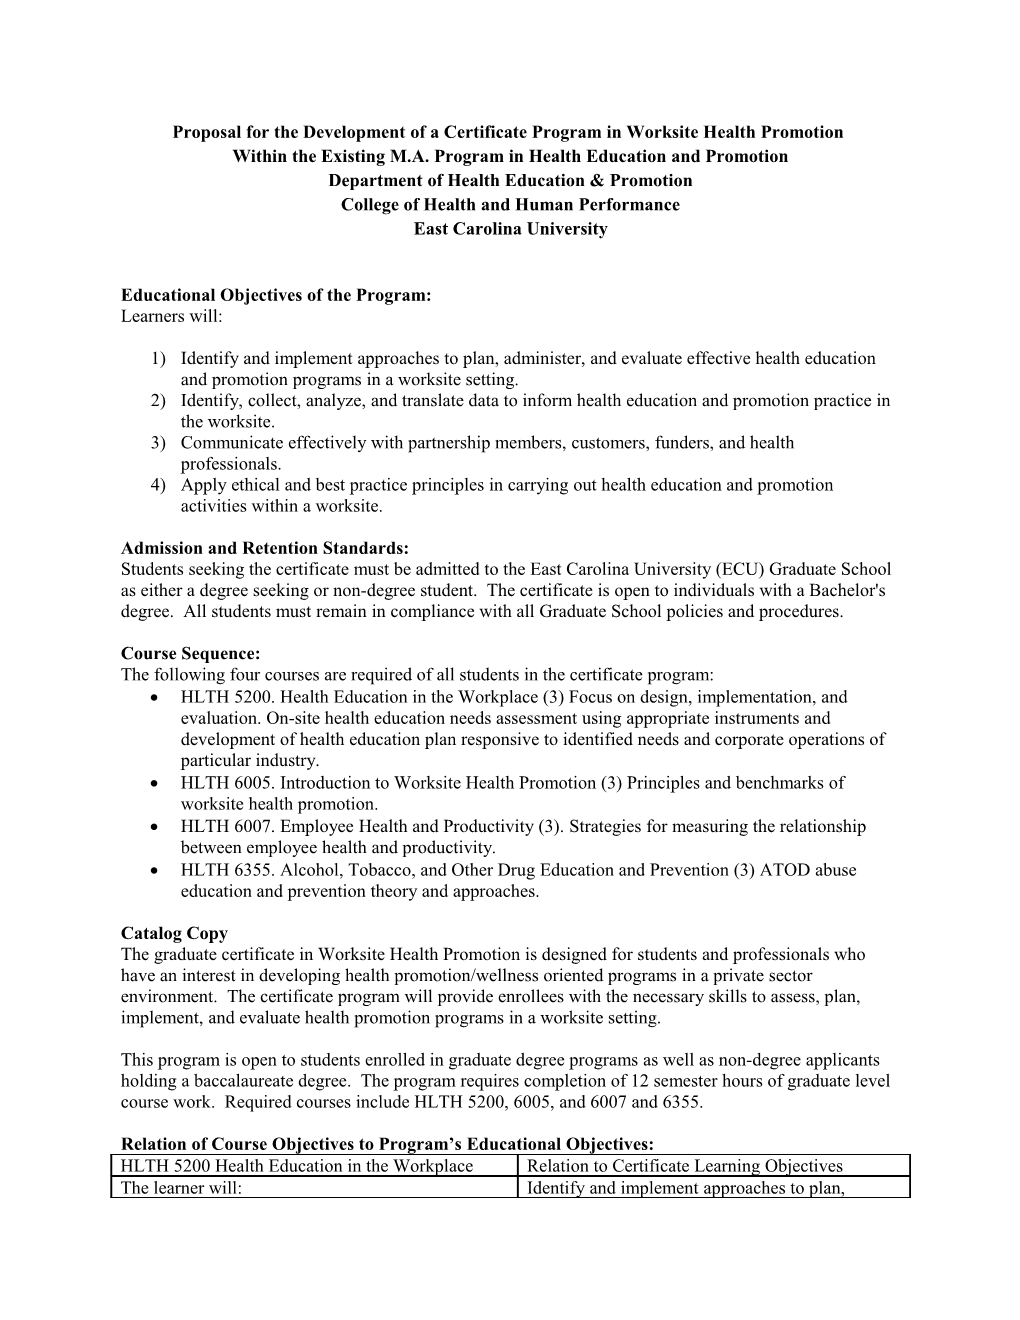 Proposal for the Development of a Certificate Program in Worksite Health Promotion